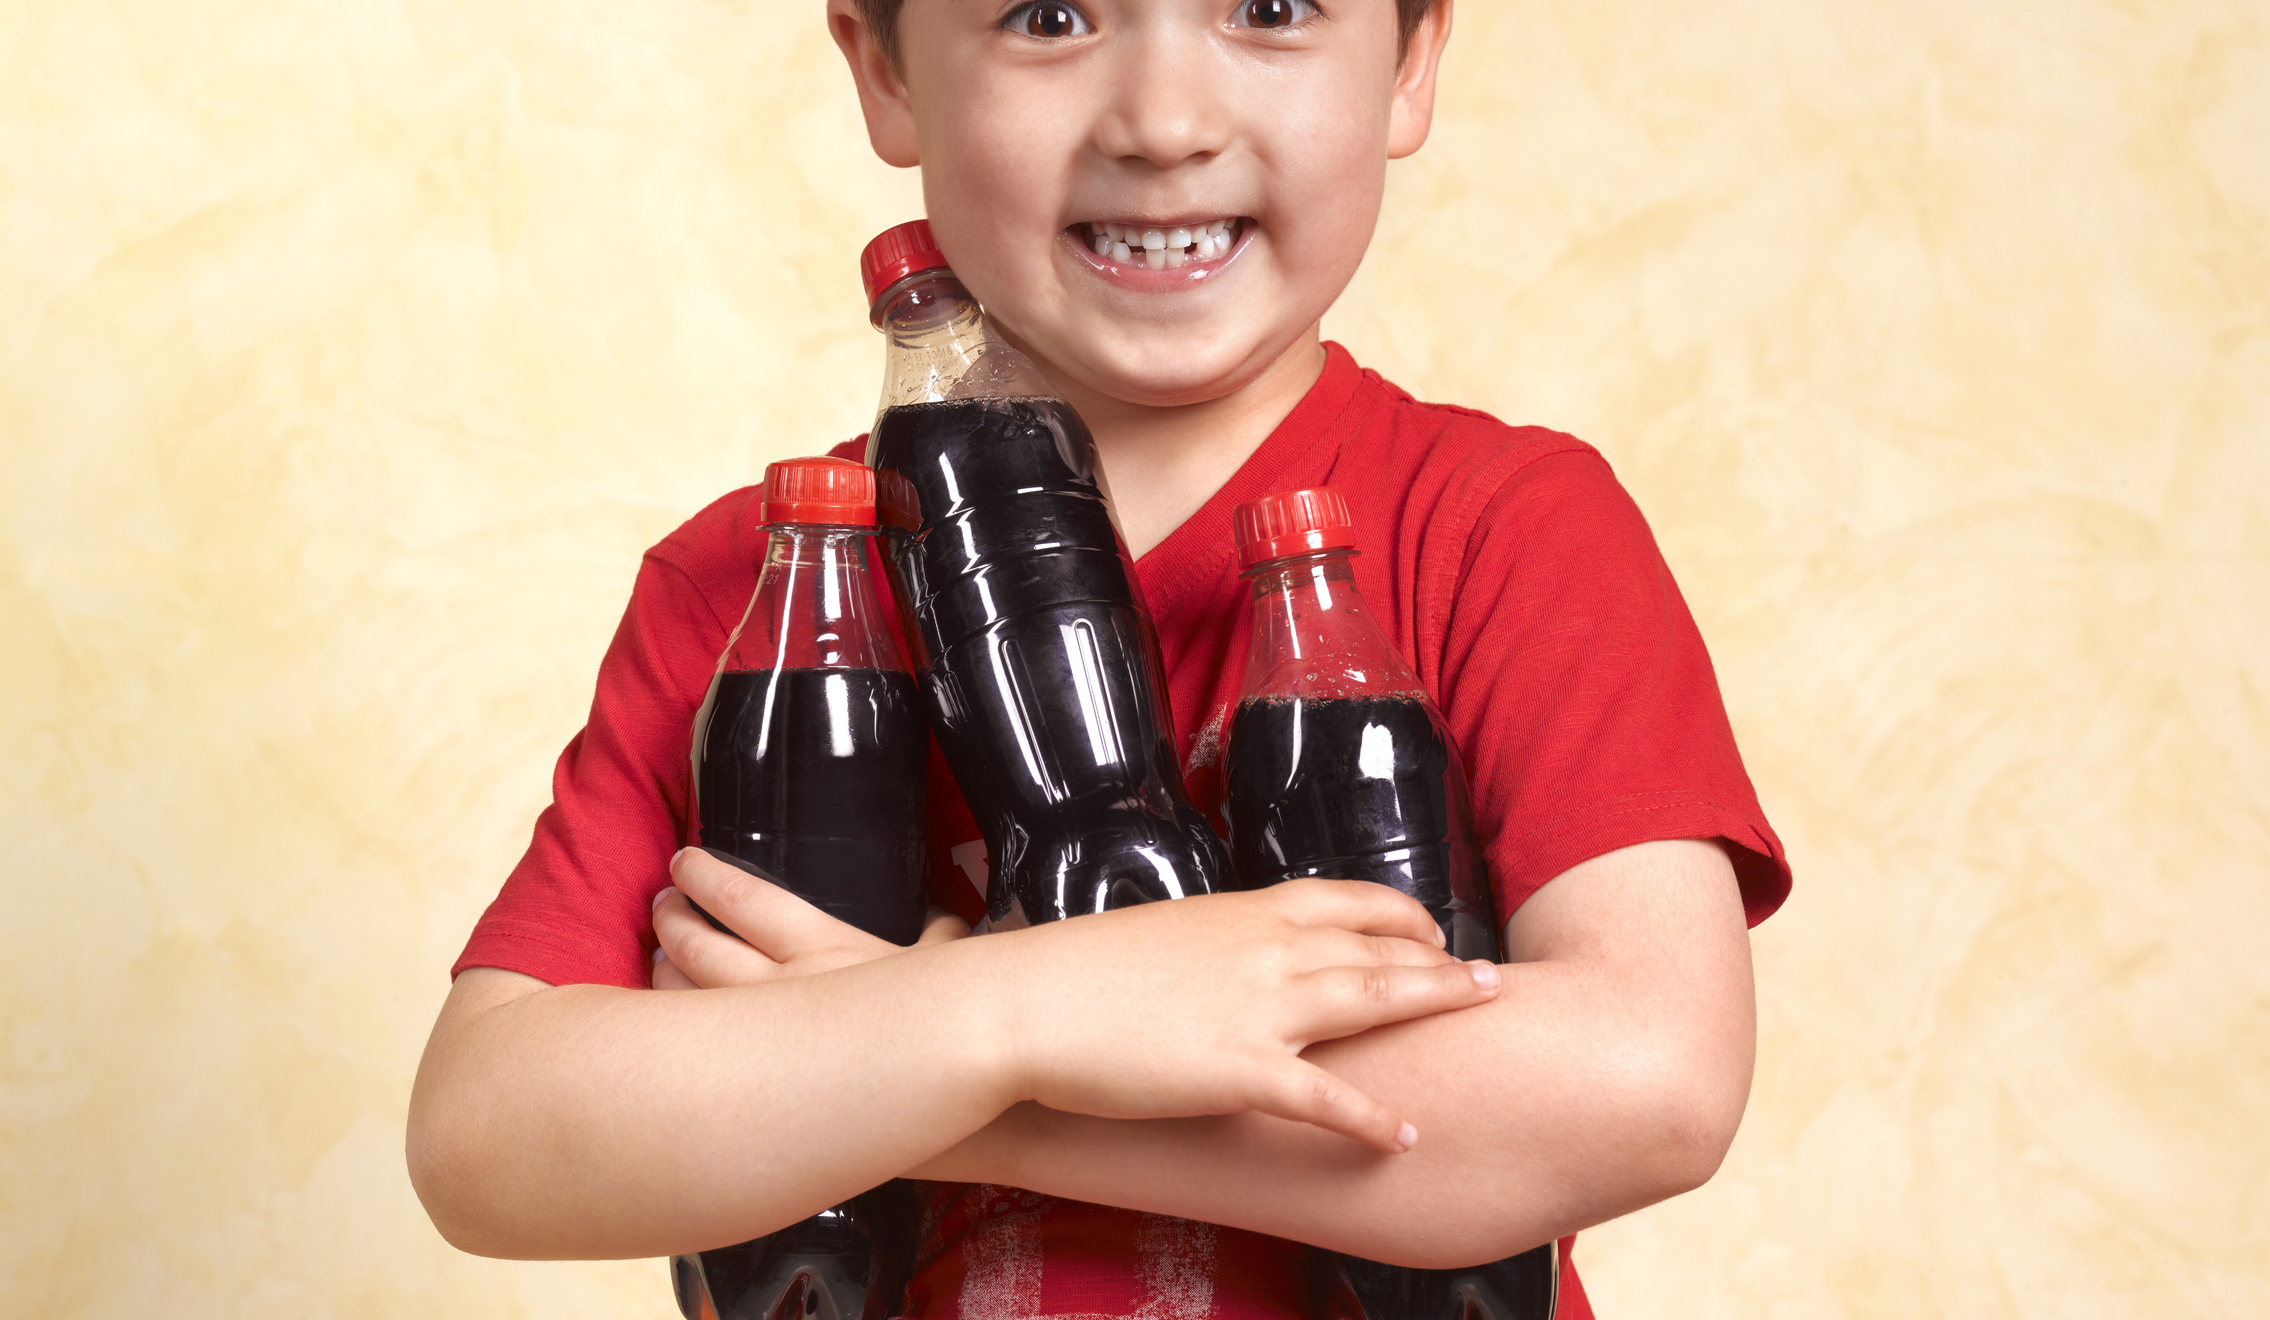 Child smiling while holding three soda bottles, standing against a yellow backdrop